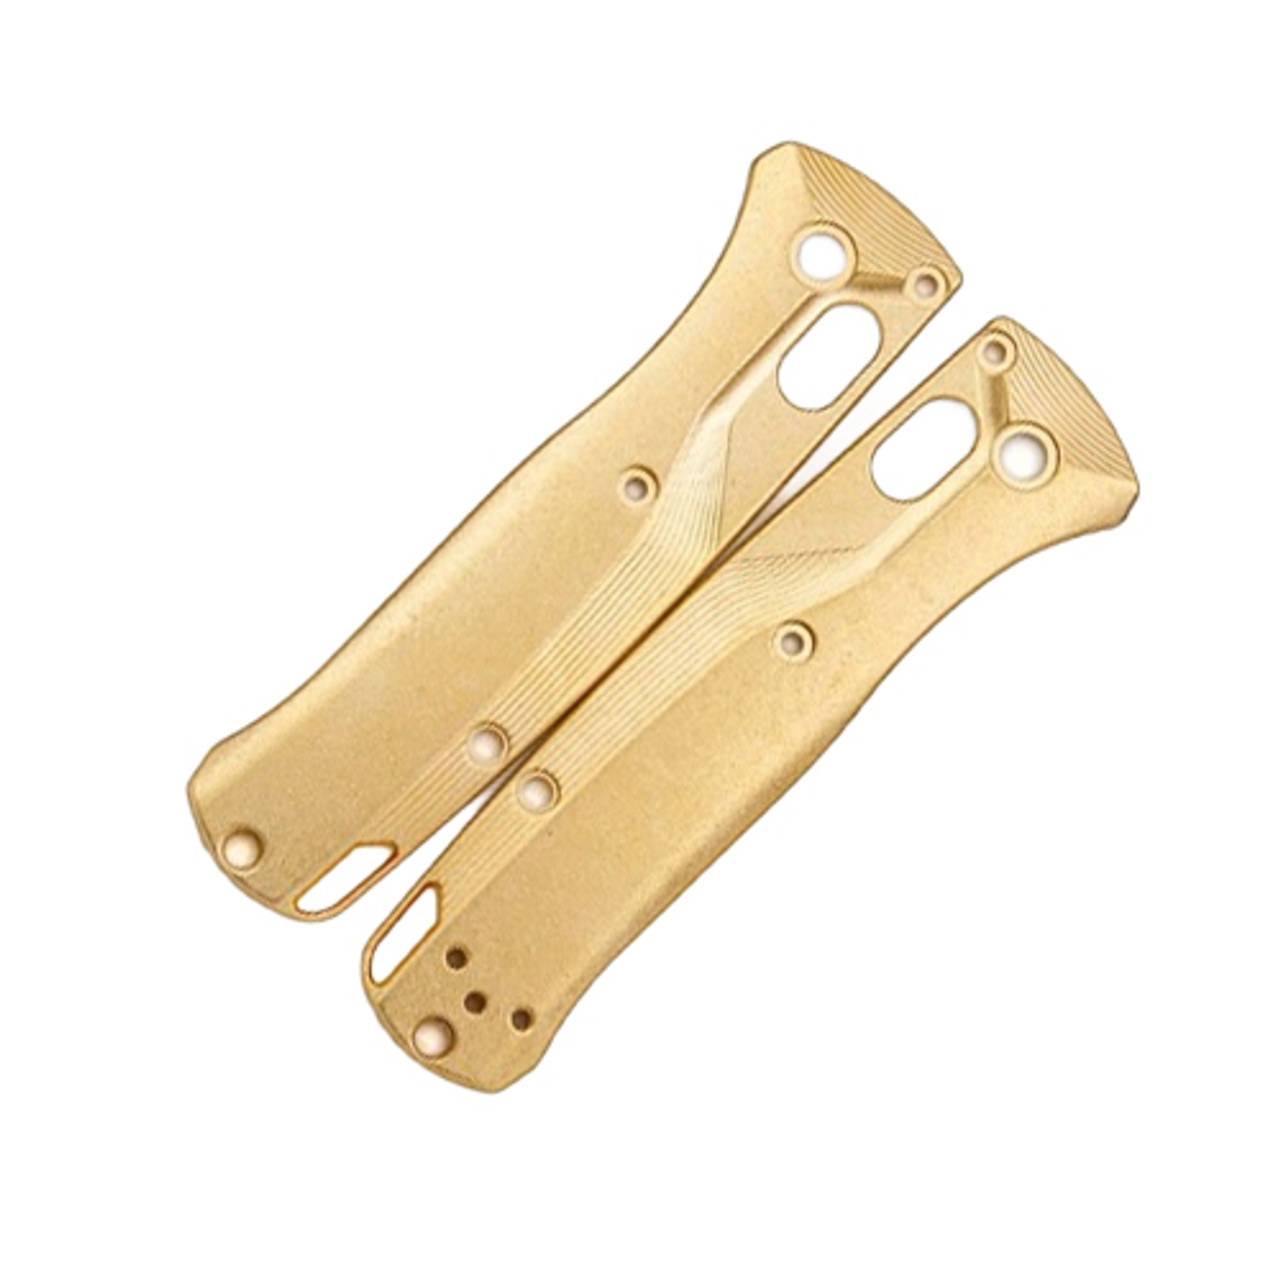 Flytanium Crossfade Brass Scales - for Benchmade MINI Bugout